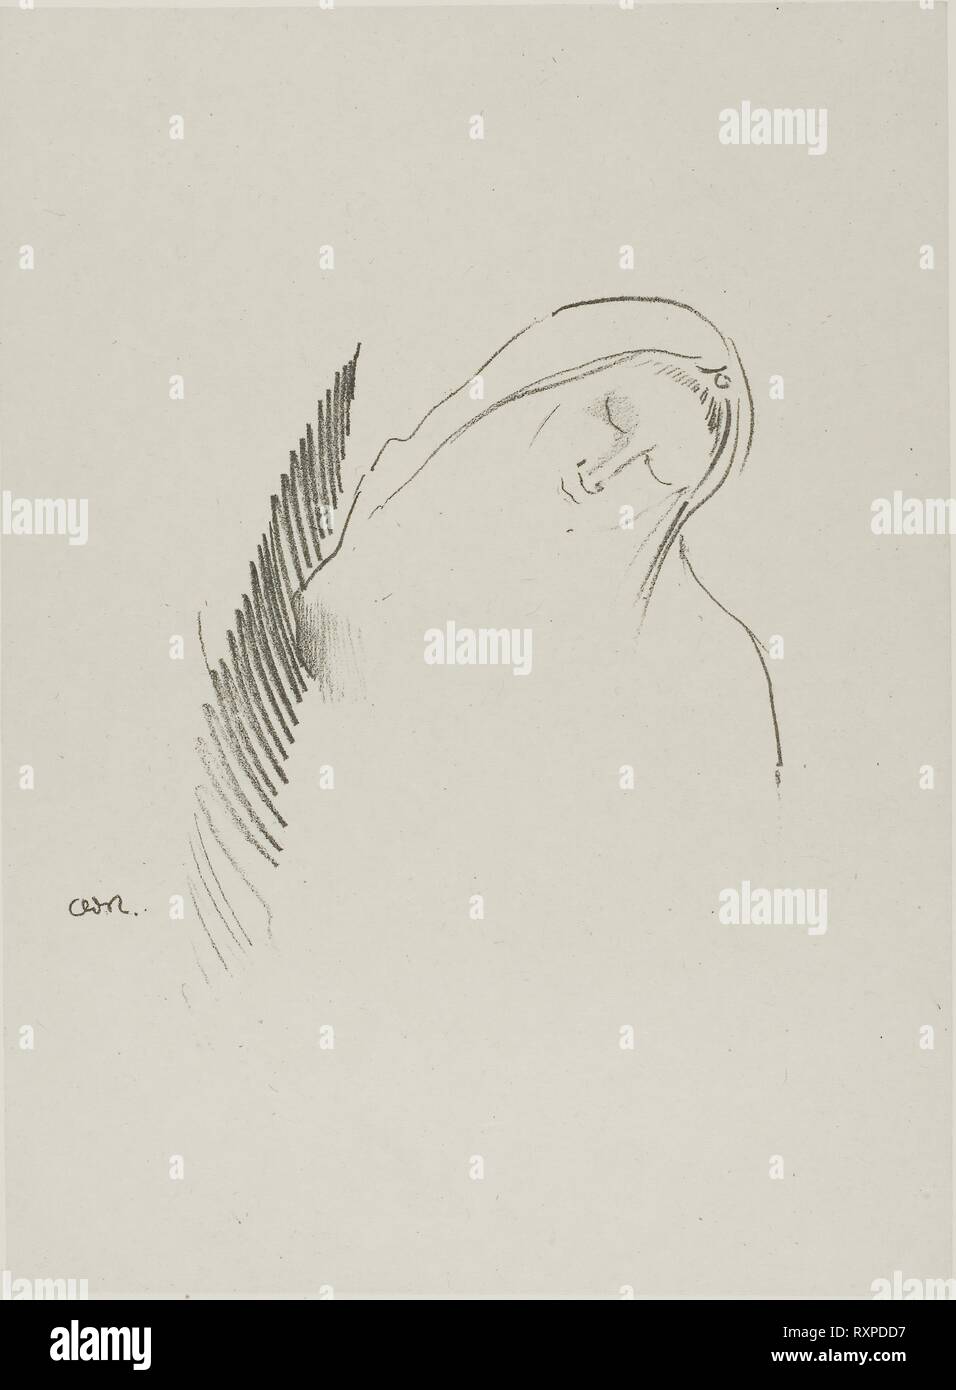 Sleep. Odilon Redon; French, 1840-1916. Date: 1898. Dimensions: 125 × 125 mm (image); 224 × 165 mm (chine); 433 × 313 mm (sheet). Lithograph in black on light gray China paper laid down on ivory wove paper. Origin: France. Museum: The Chicago Art Institute. Stock Photo